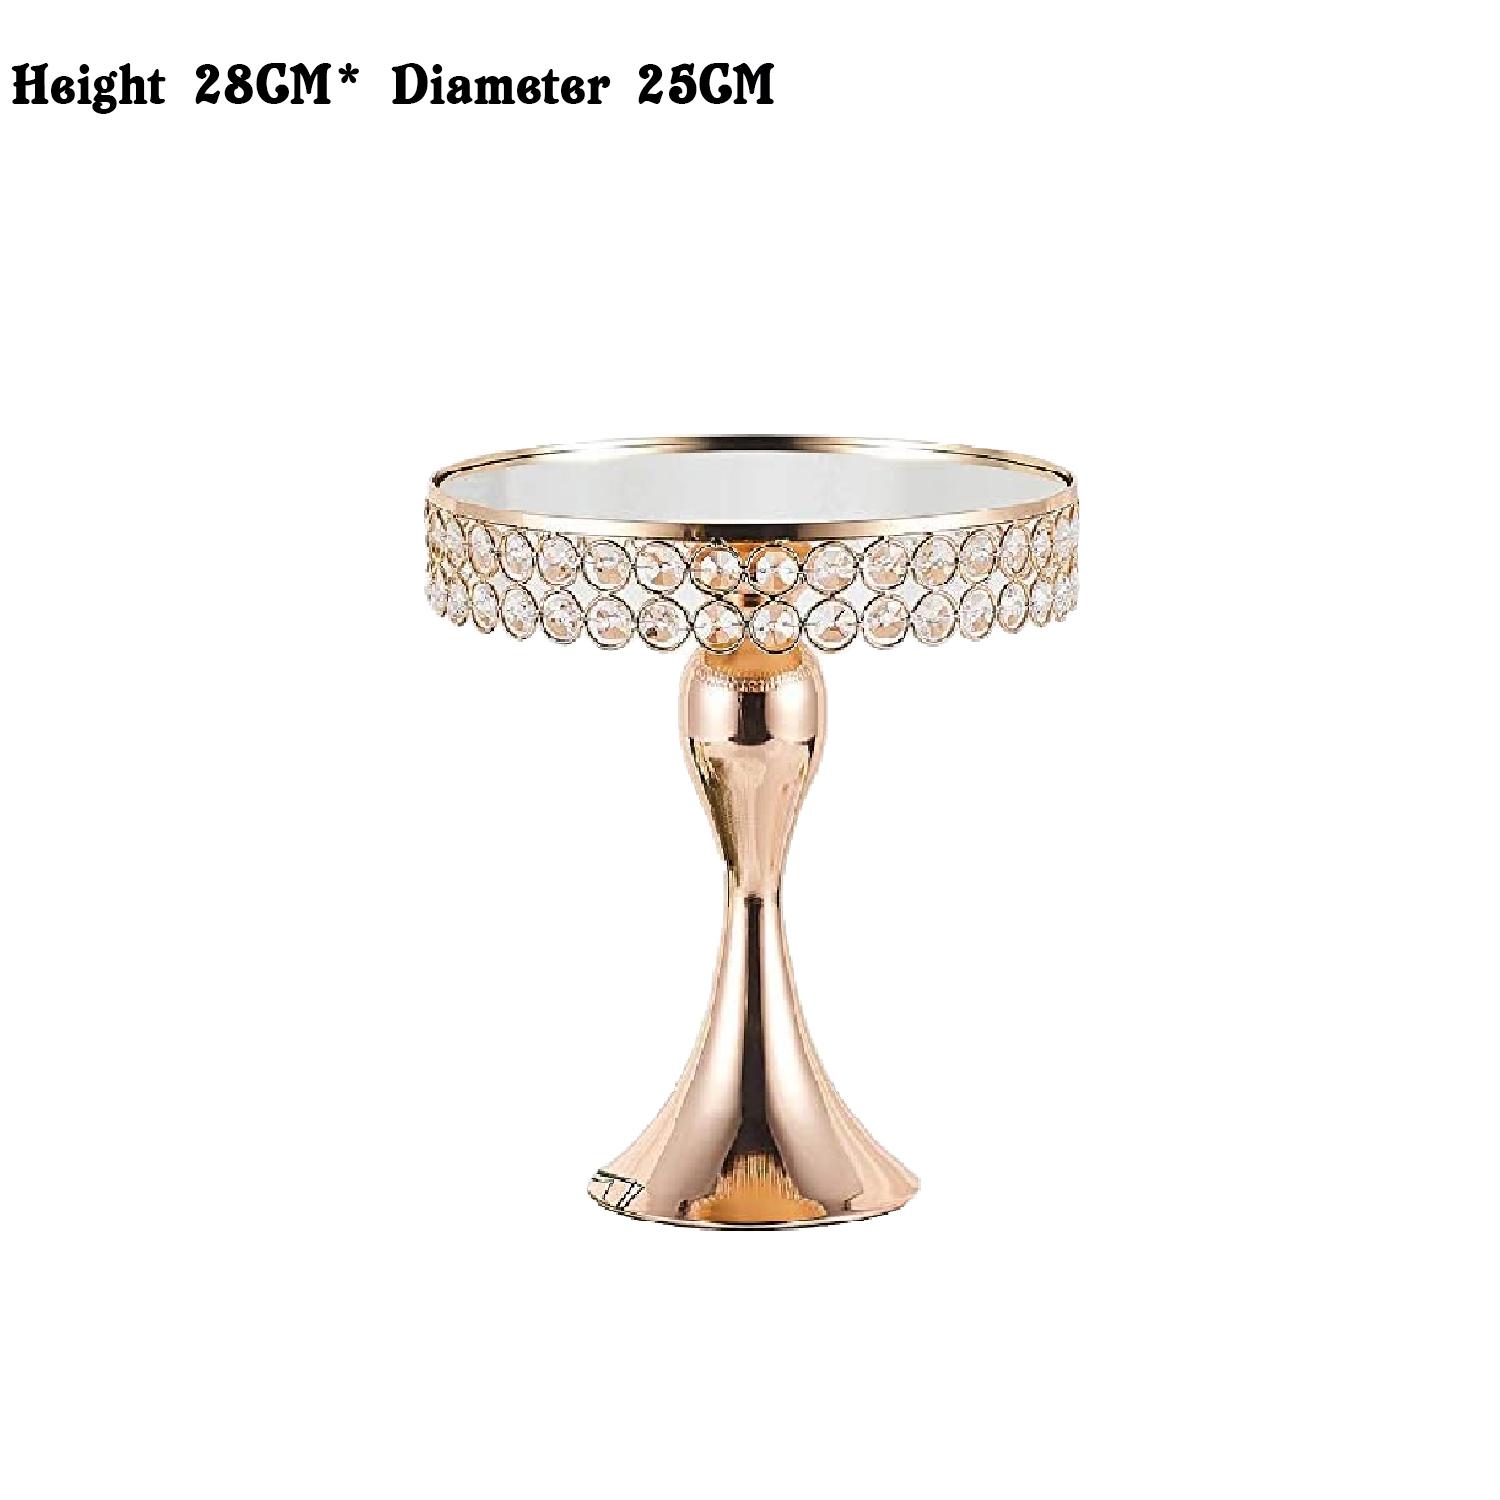 GOLD CRYSTAL CAKE STAND 1PC H 28CM* D 25CM